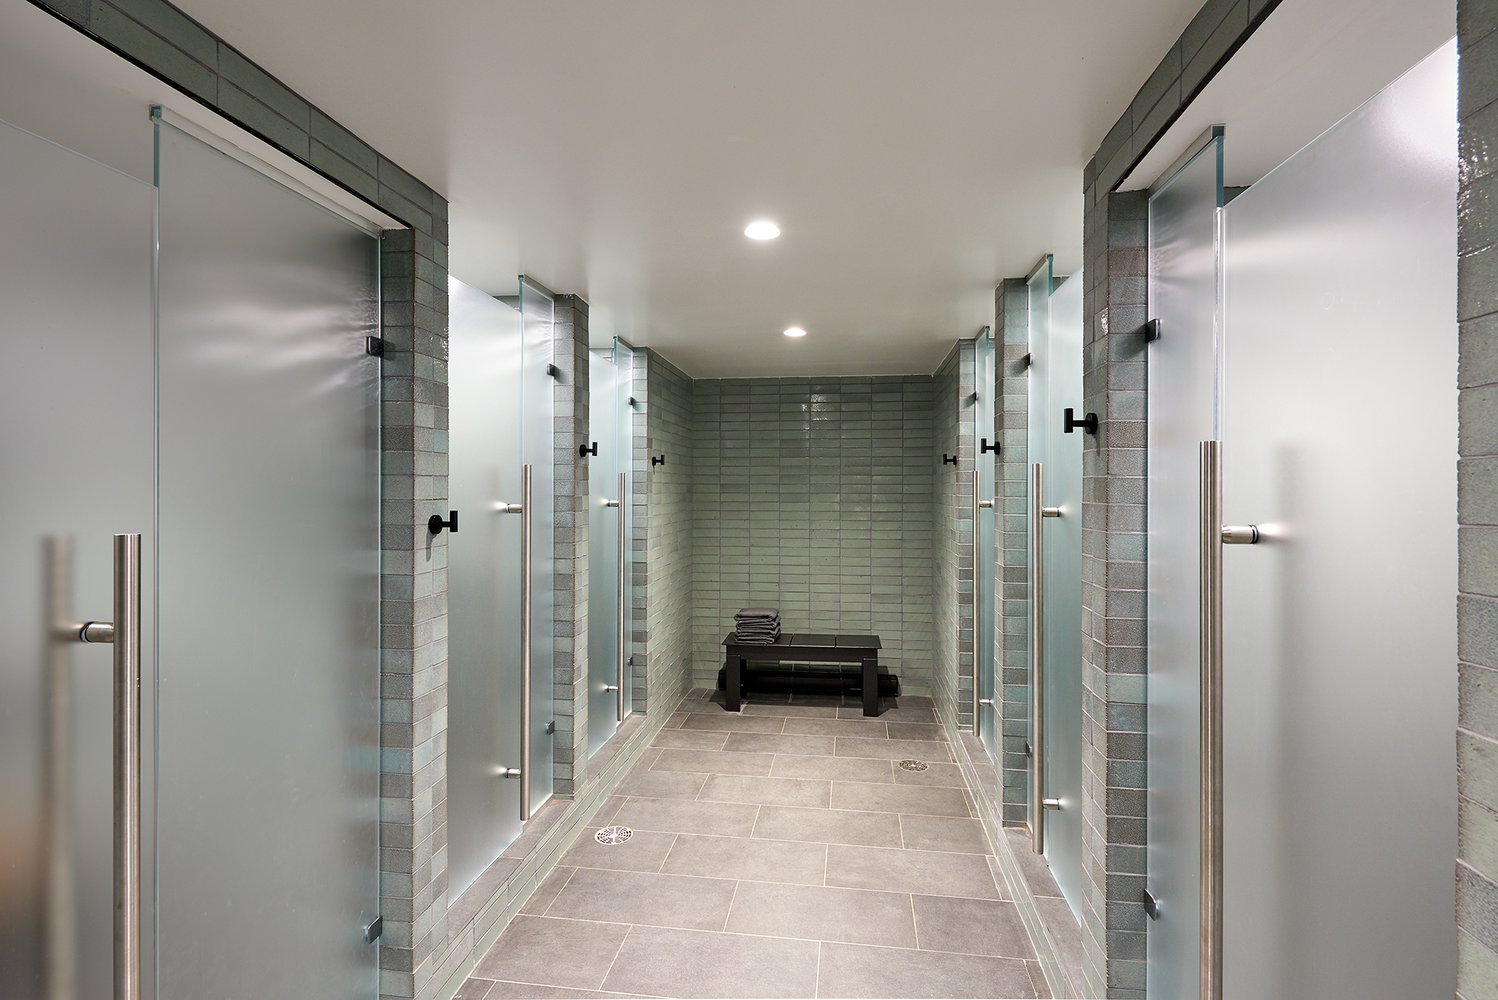 Luxury gym shower cubicles at the Nomad Tower hotel